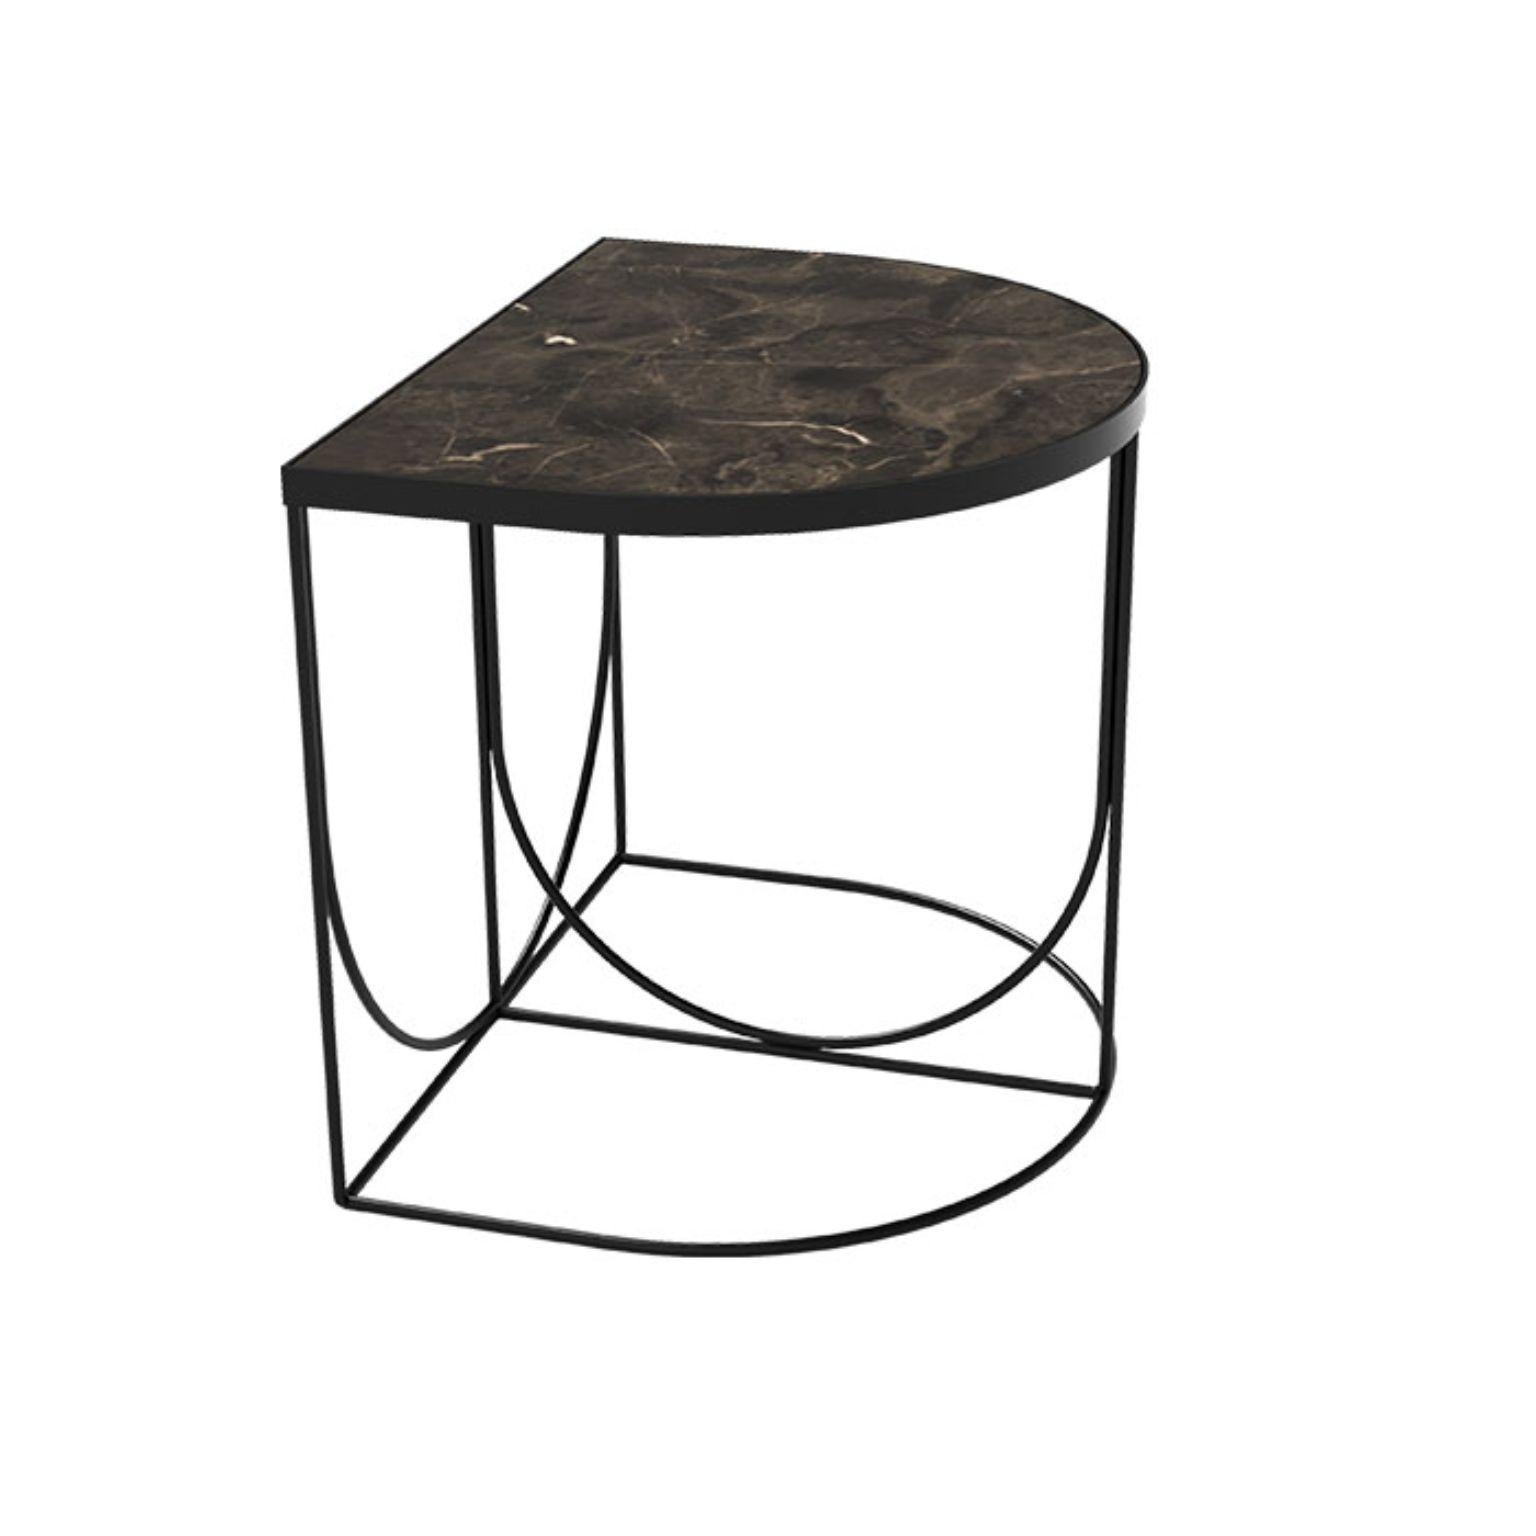 Marble and steel minimalist side table
Dimensions: L 40 x W 50 x H 44.3 cm
Materials: Marble, steel  

This series consists of three different designs that you can combine in many different ways. The table tops come in two different colored